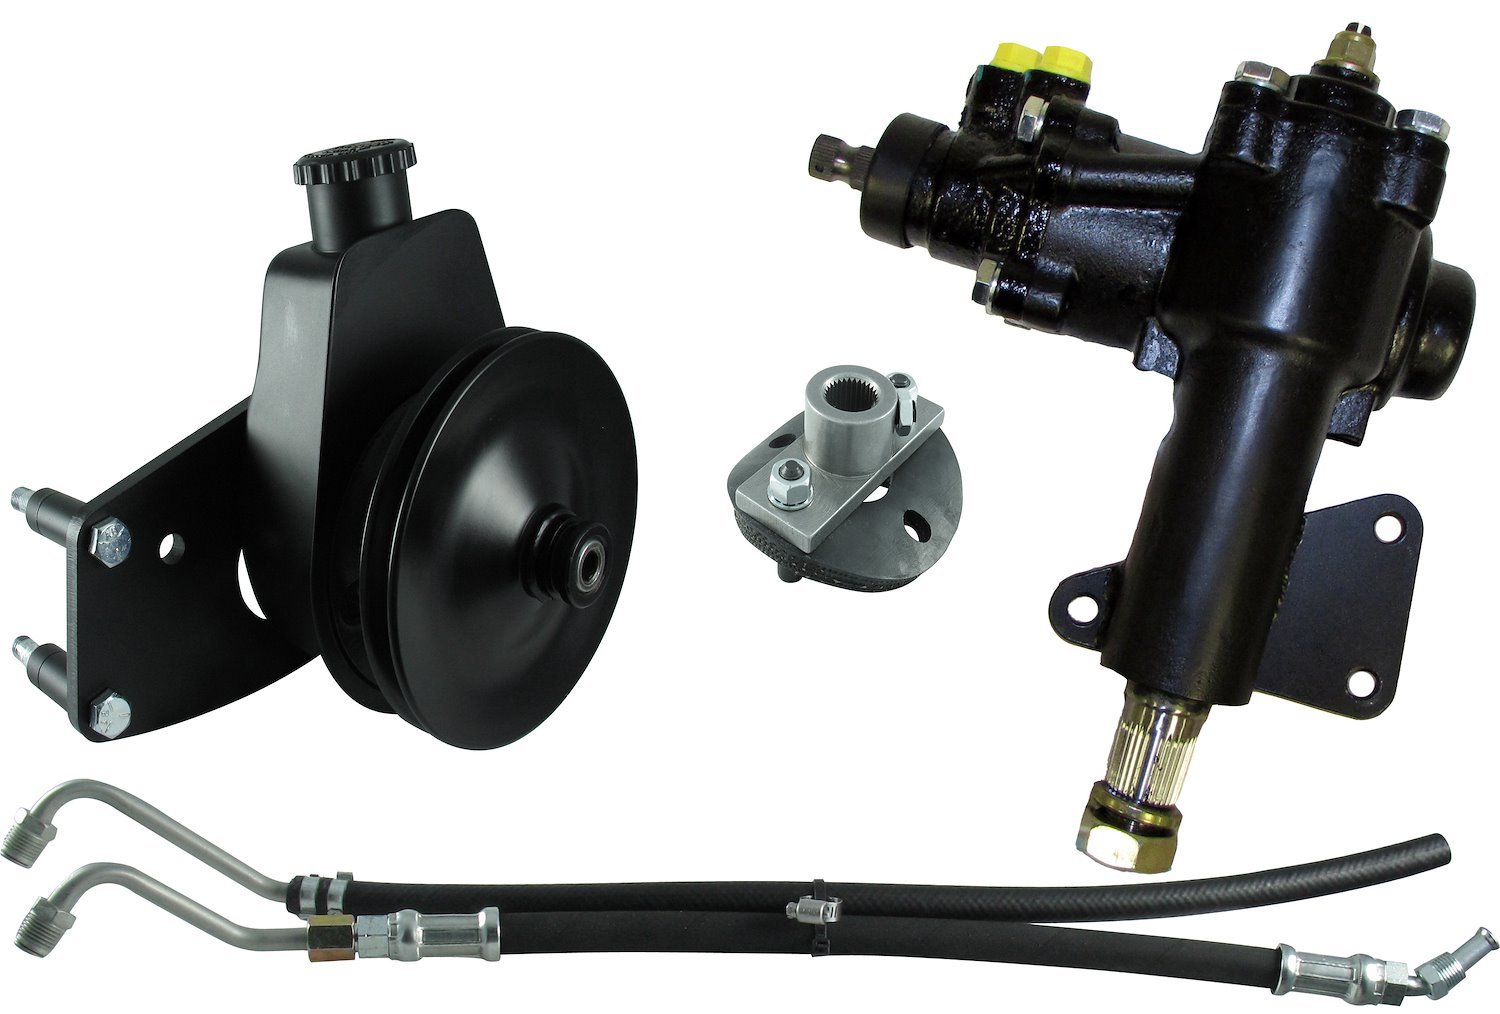 Power Steering Conversion Kit 1967-1977 Ford Mid-Size Cars